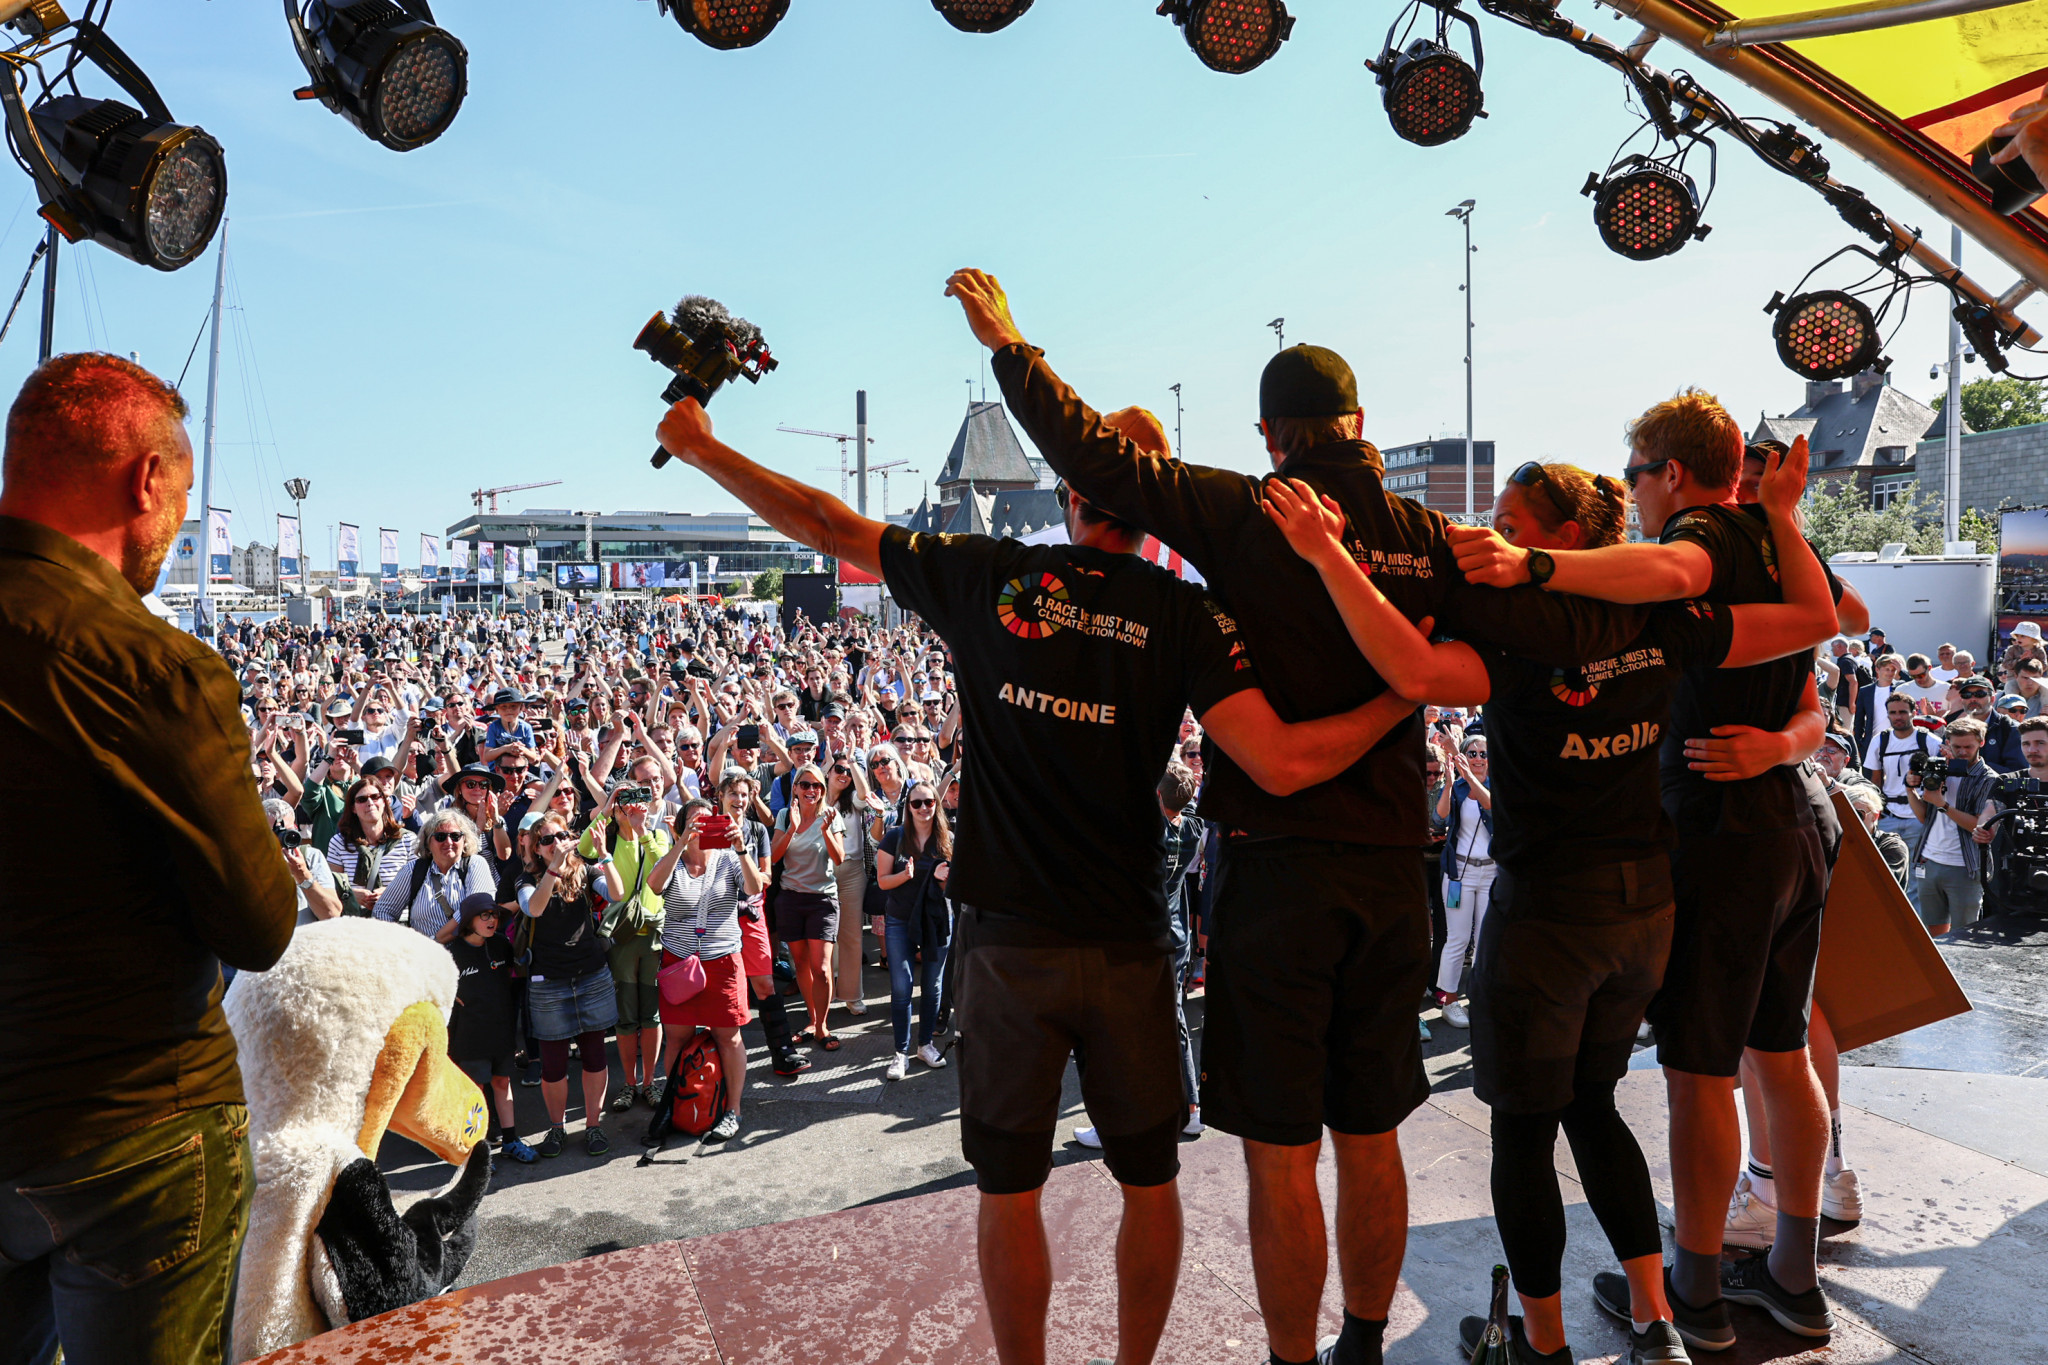 All the teams got the chance to lap up the adulation from the massive crowd that turned out in Aarhus ©The Ocean Race